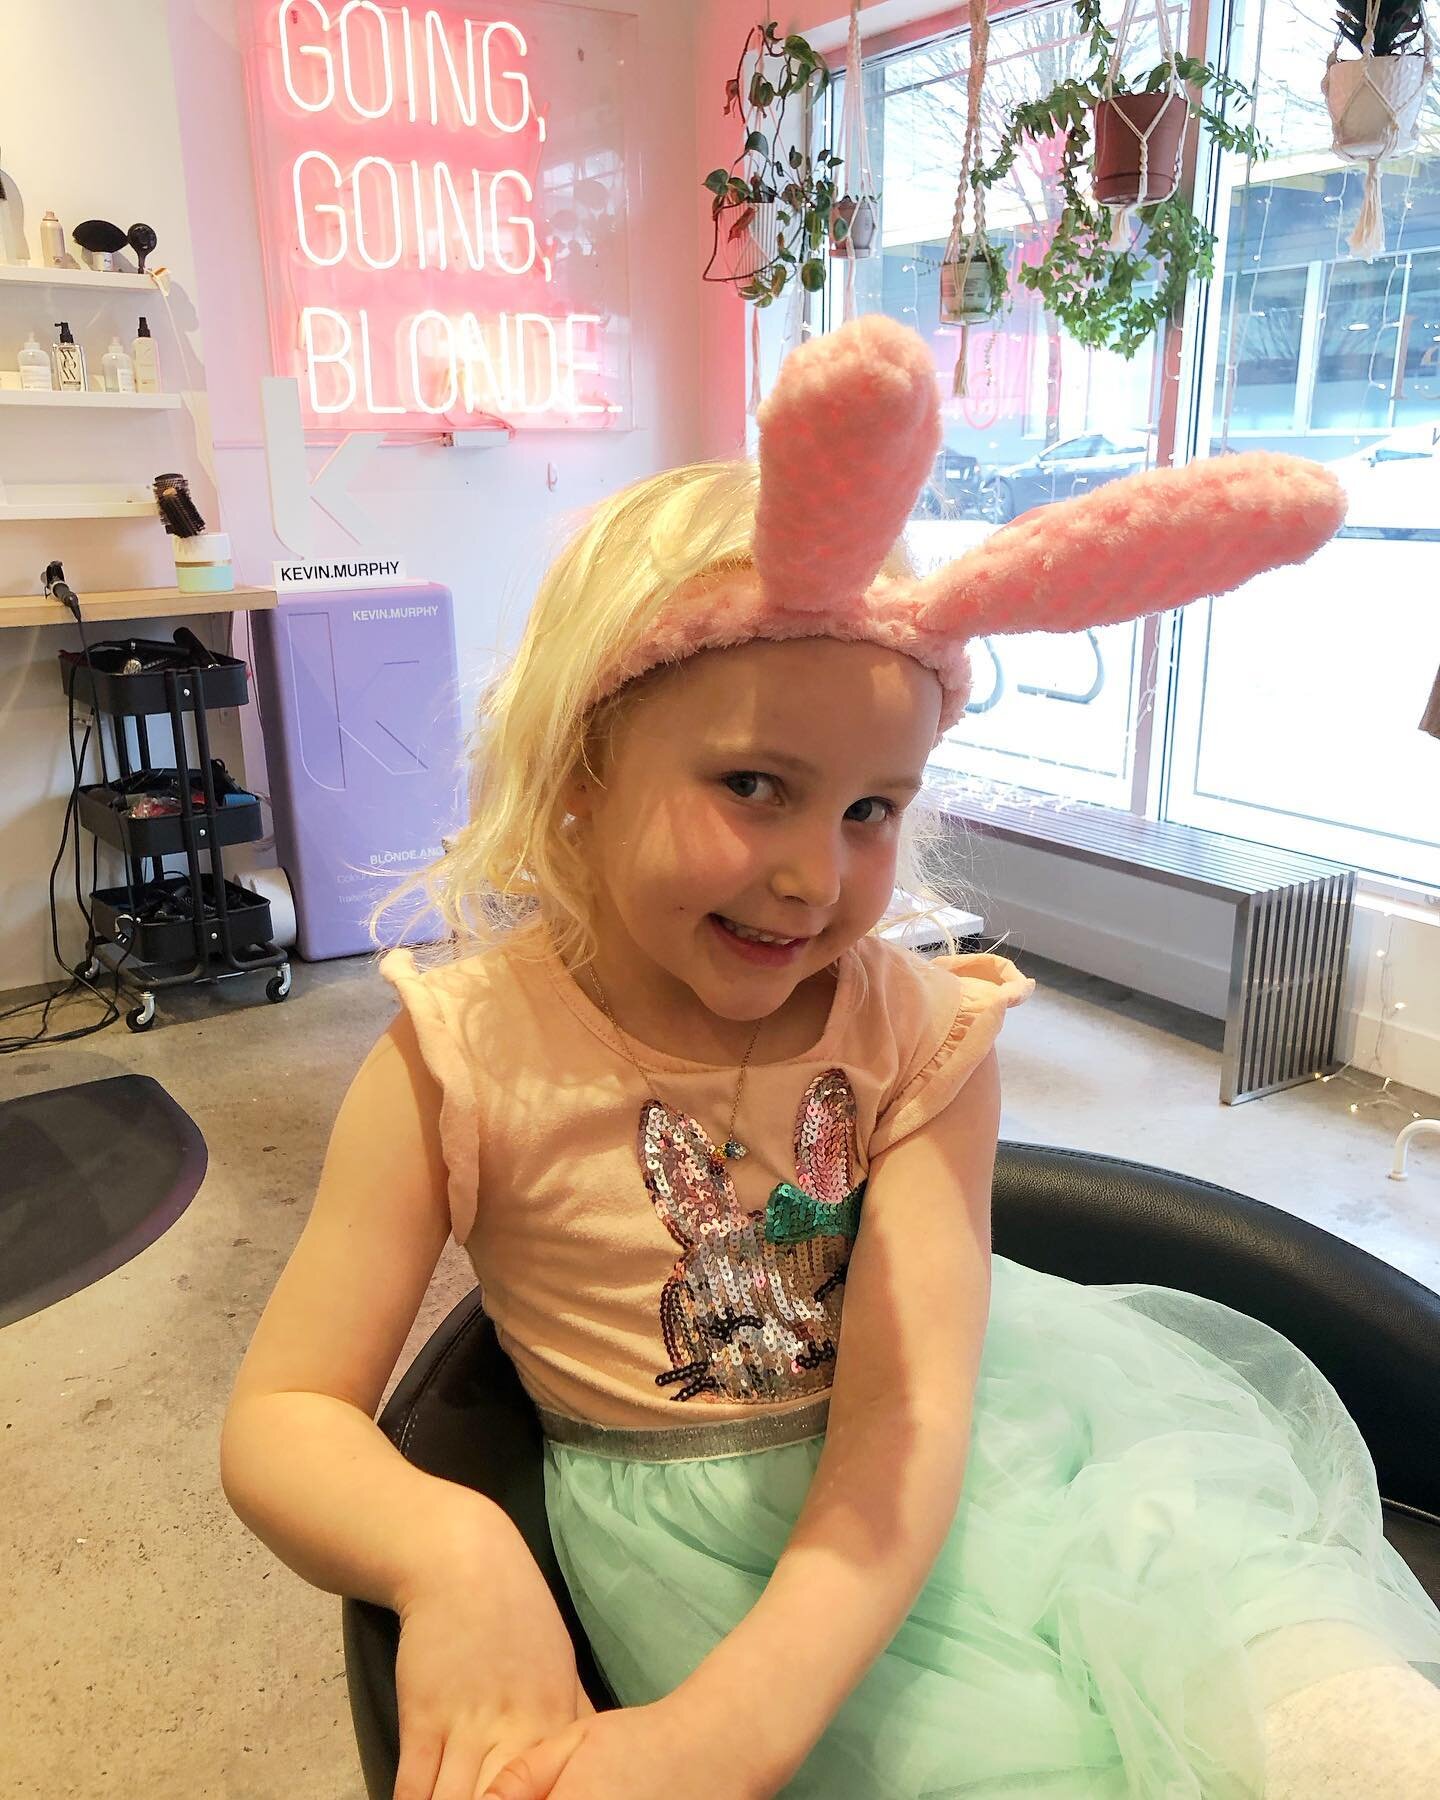 This little bunny wanted a bob @ alixarthurdesign.com&hellip; 🐰 Booking link in bio.
&bull;
&bull;
&bull;
#vancouverhairstylist #kidshairstyles #bobhaircut #vancouverhair